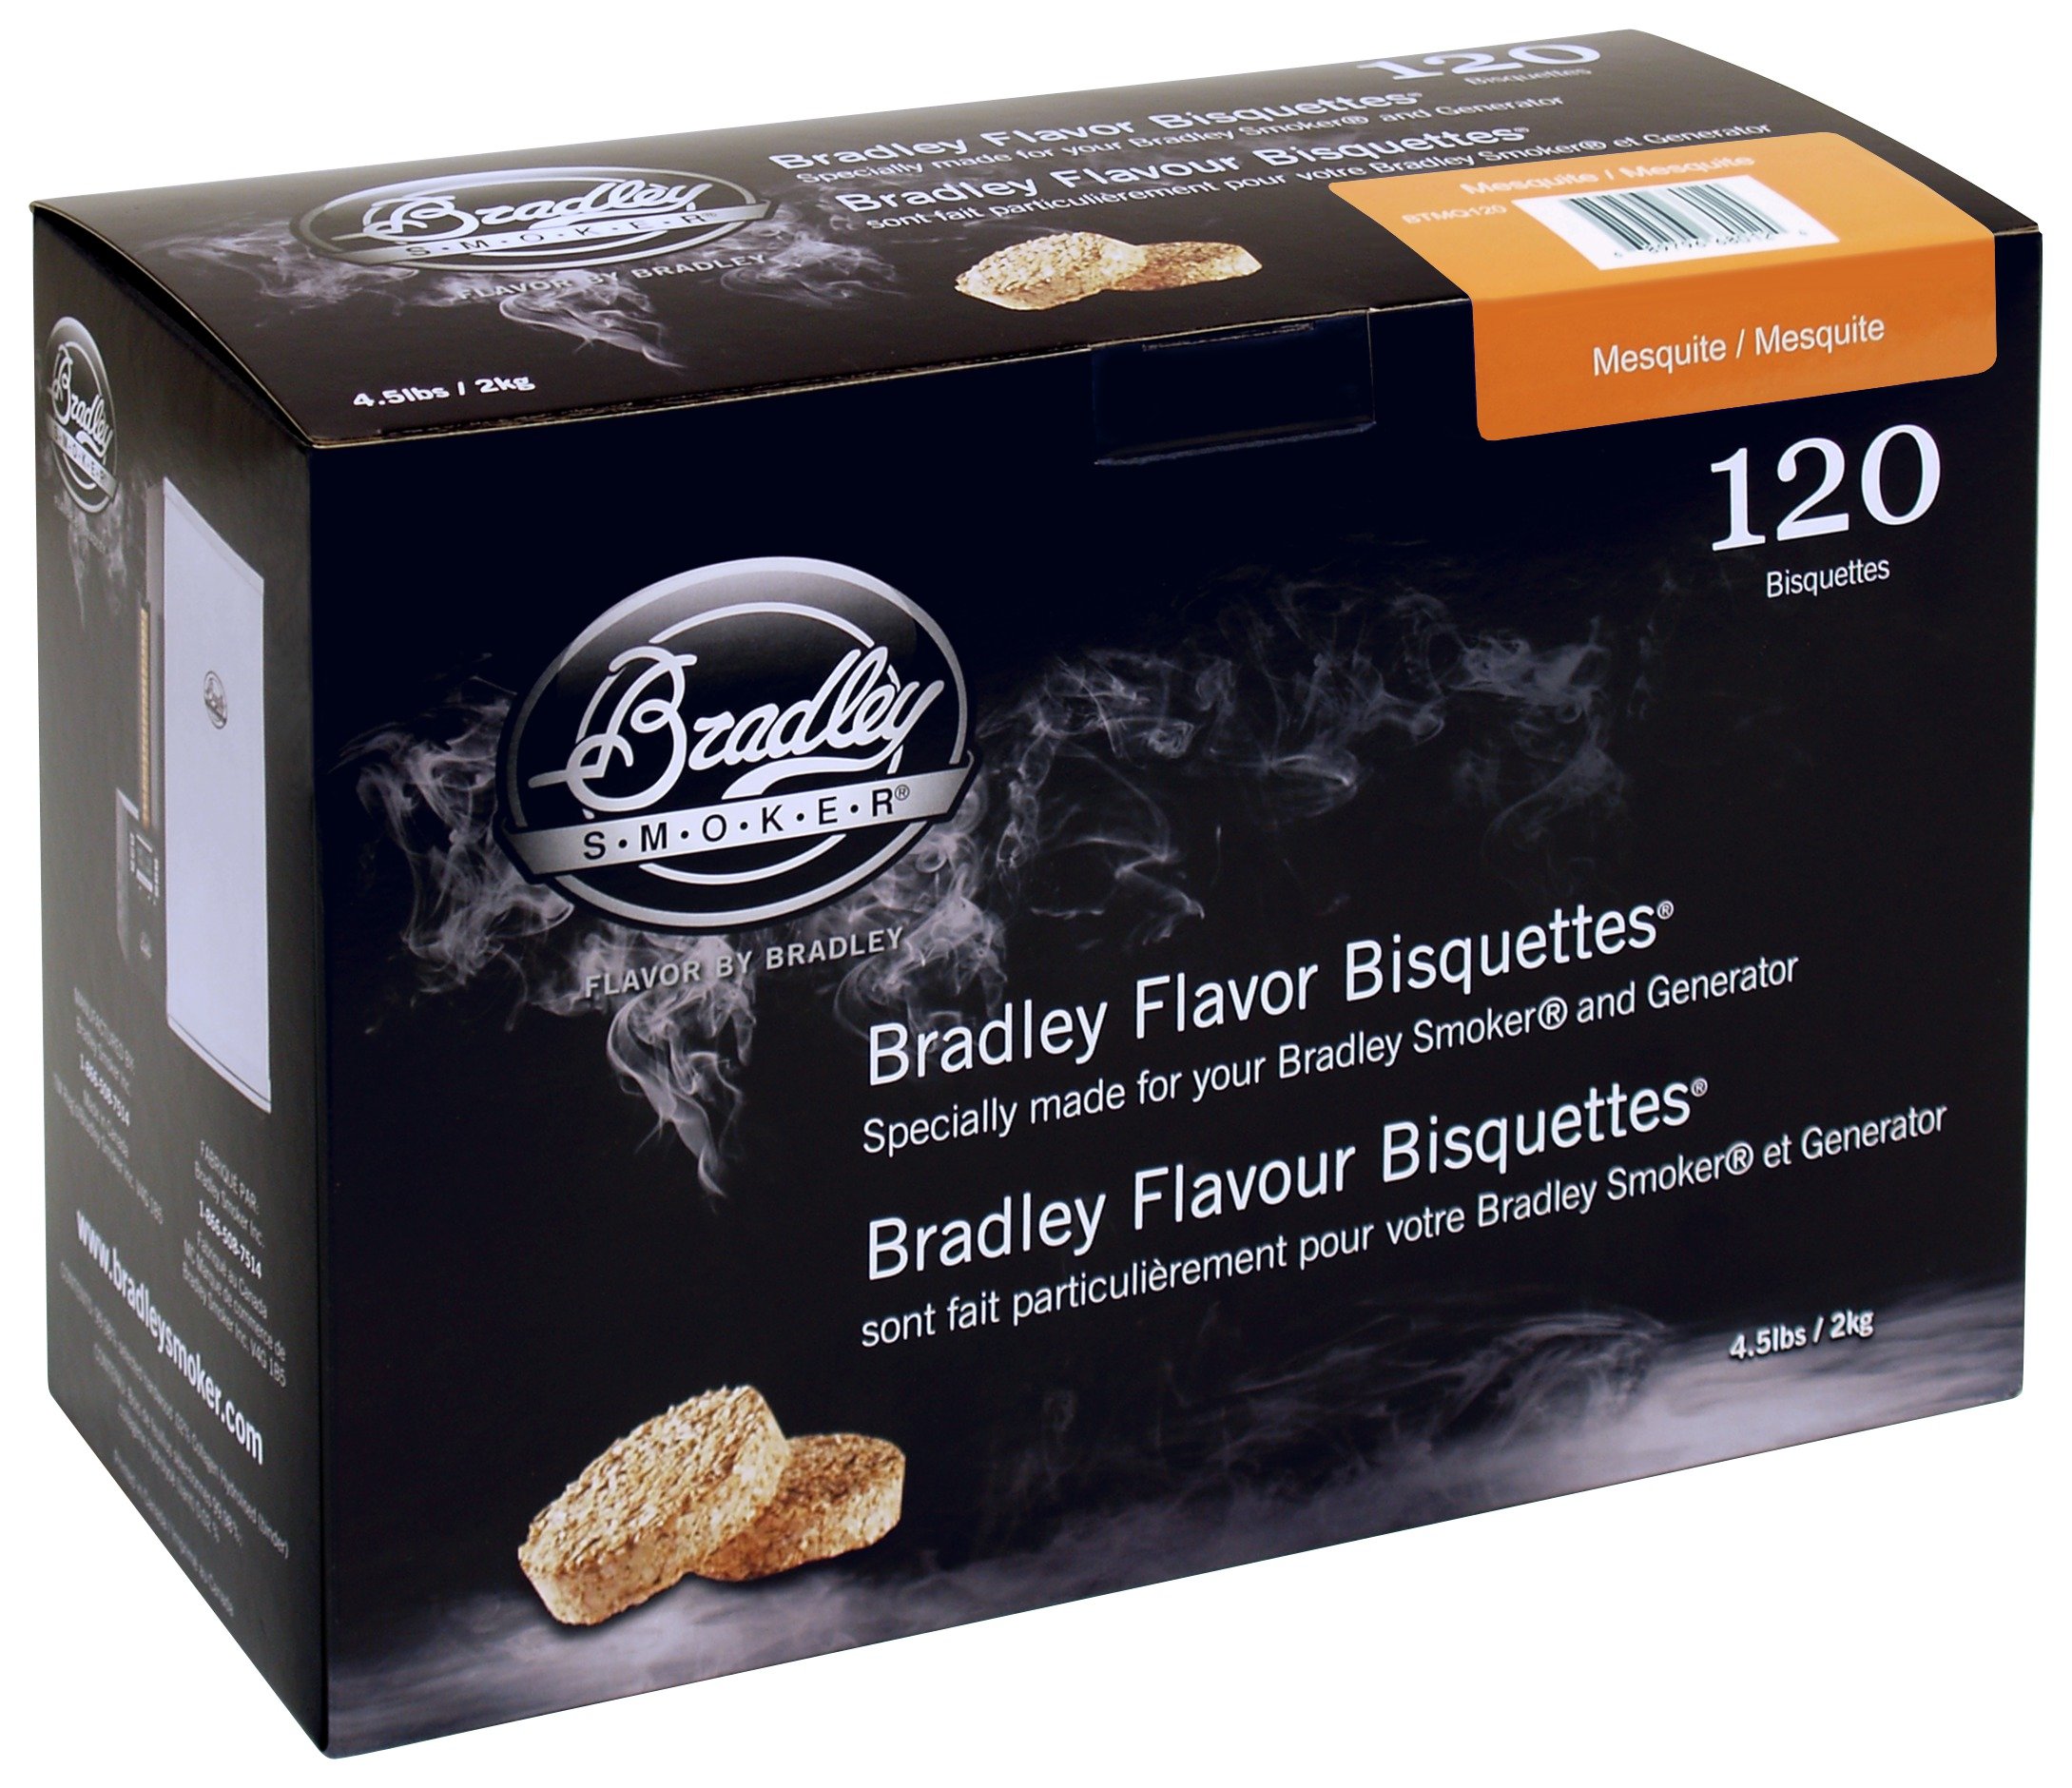 Bradley Smoker Mesquite Bisquettes - 120 Pack